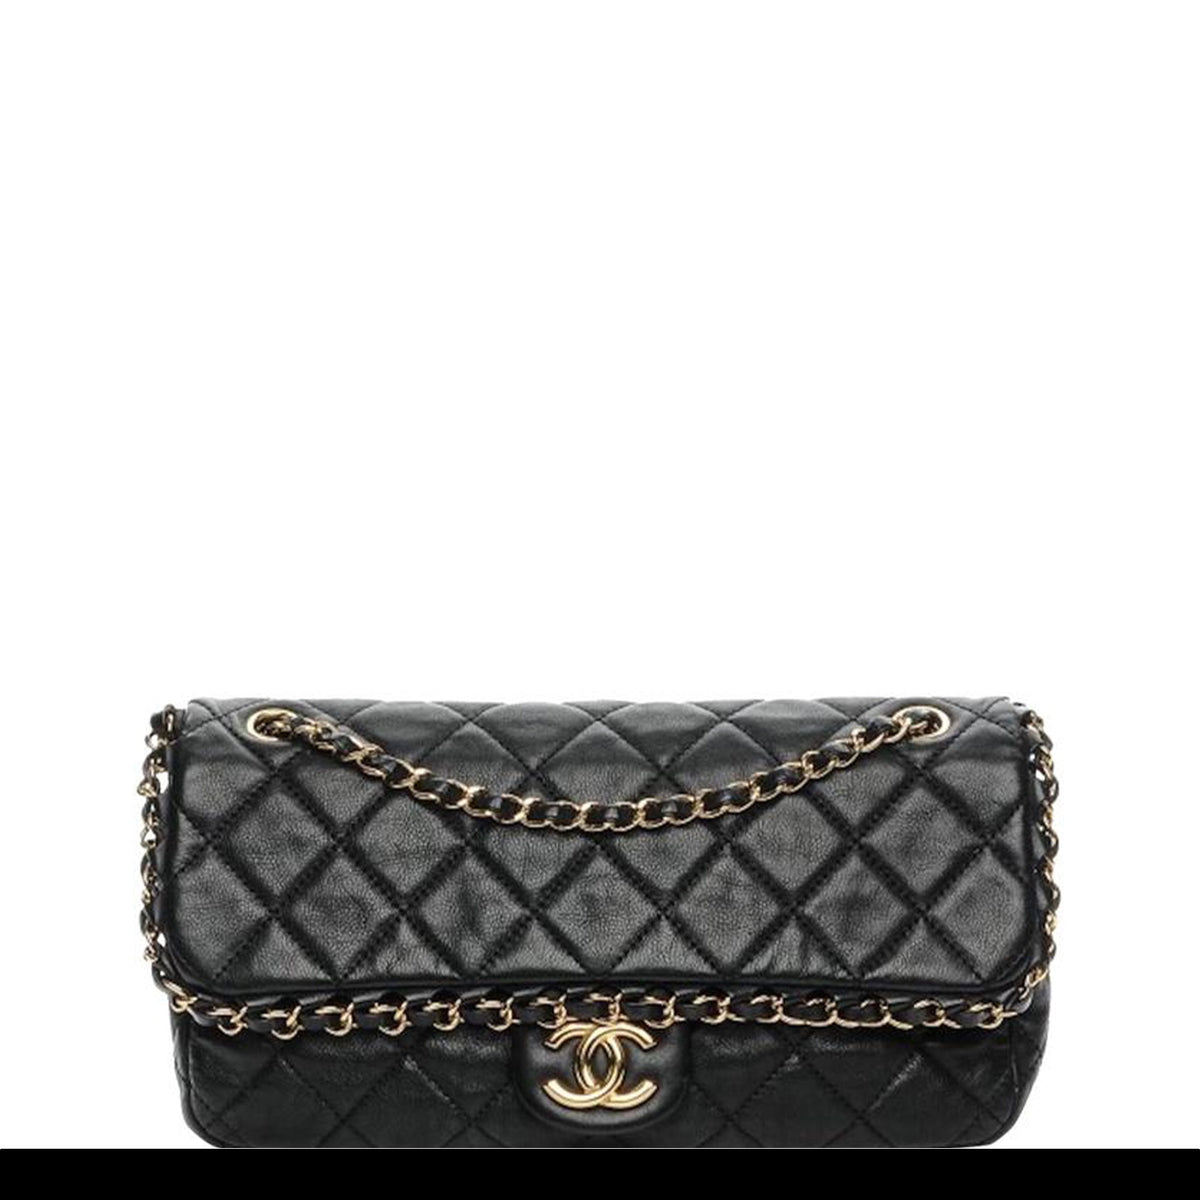 CHANEL Double Flap Black Quilted Lambskin Leather Medium Shoulder